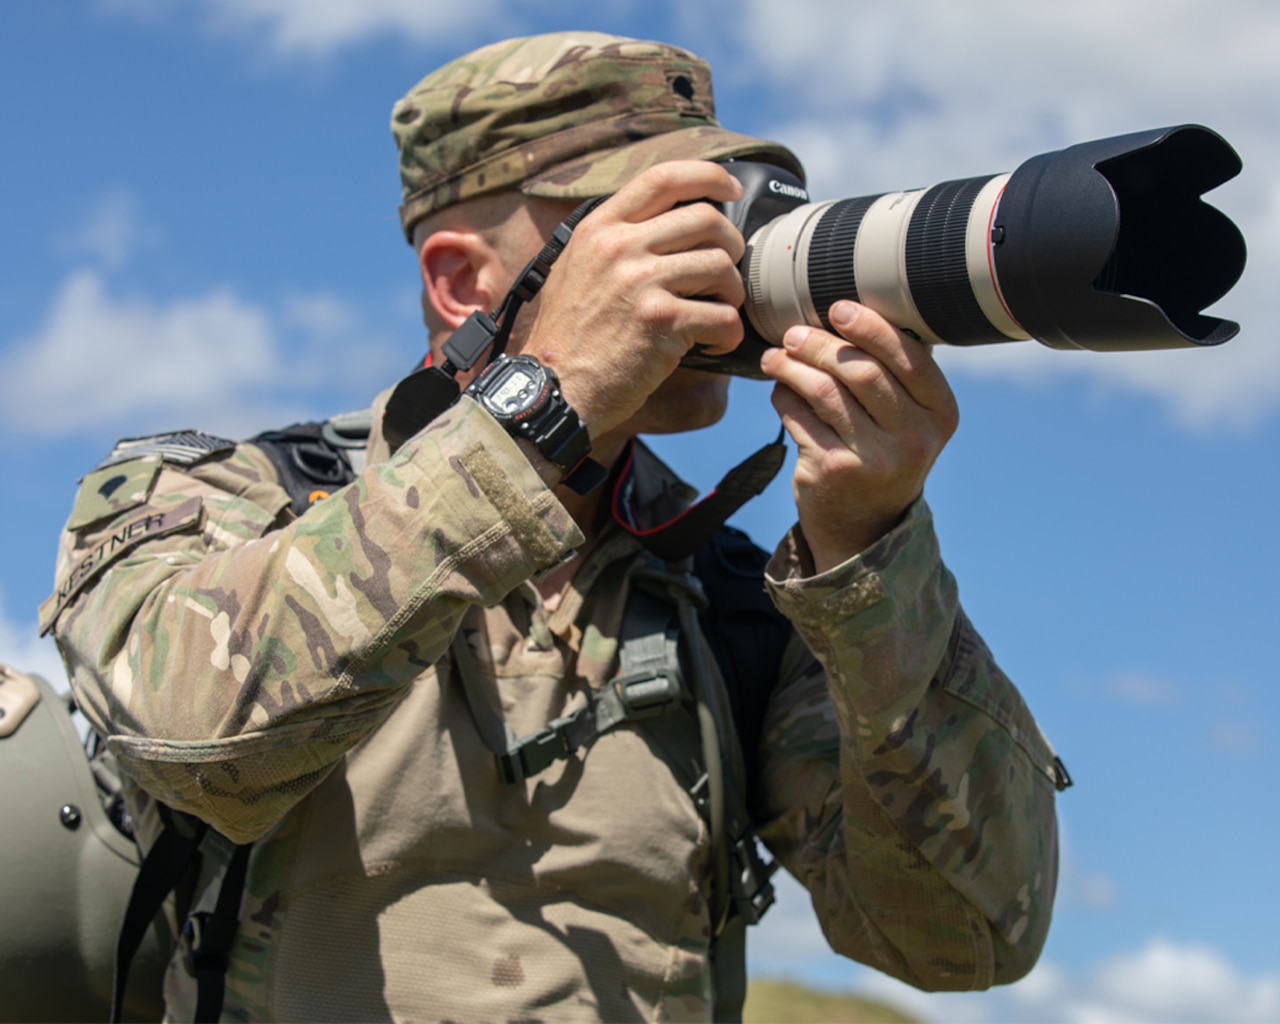 Take a glimpse into the daily lives of the Defense Department and its people through the eyes of military photographers during operations, training activities, humanitarian missions and other major events of 2021.